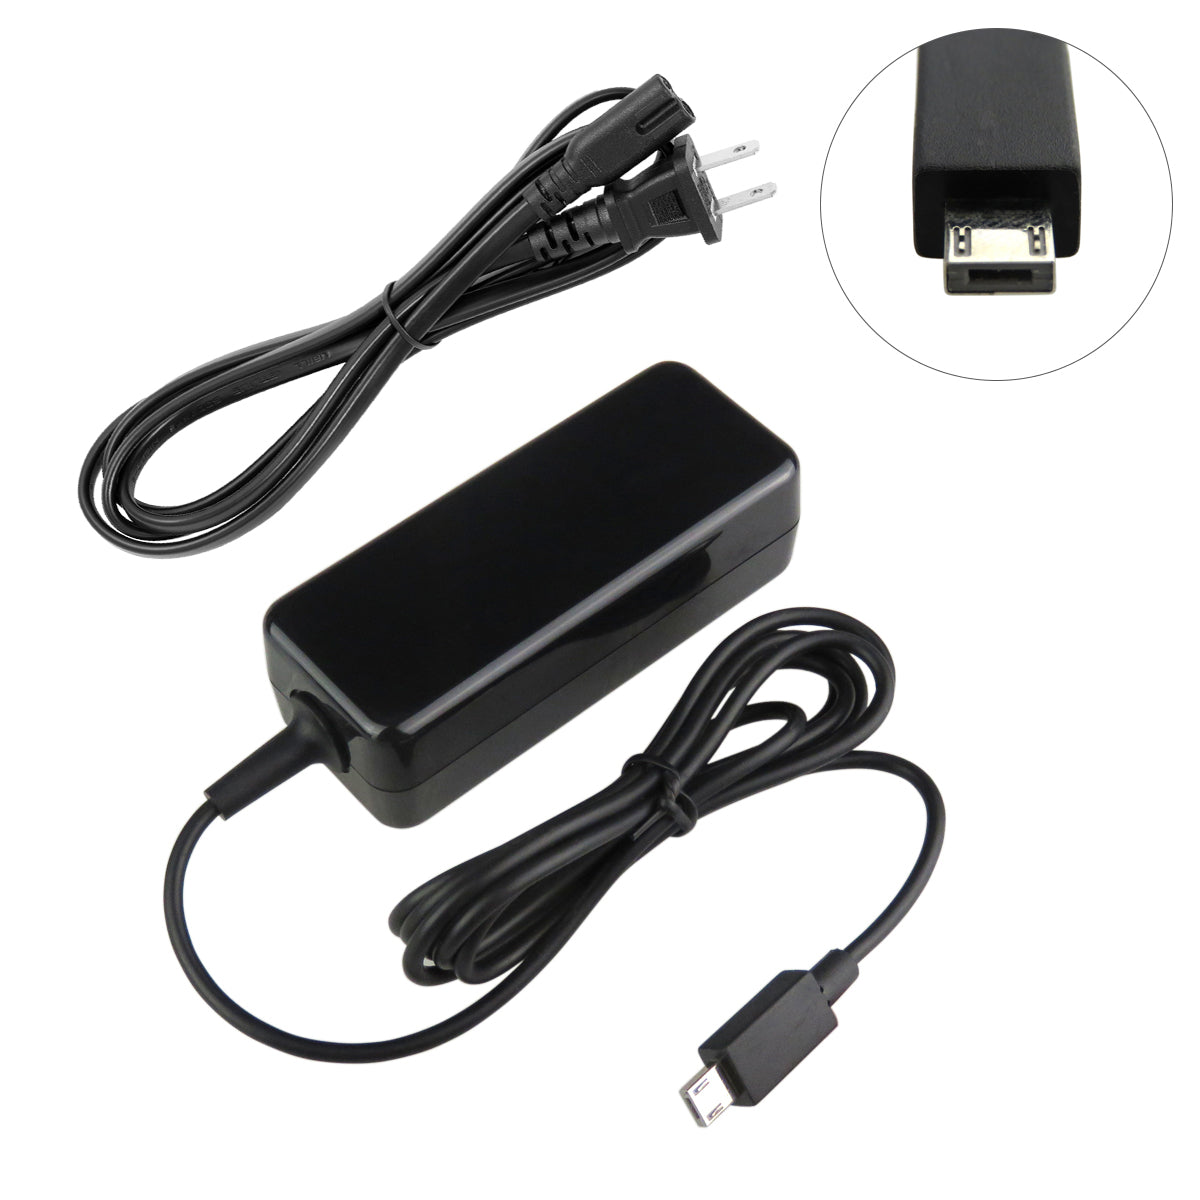 Charger for ASUS EeeBook E202SA-FD112D Laptop.